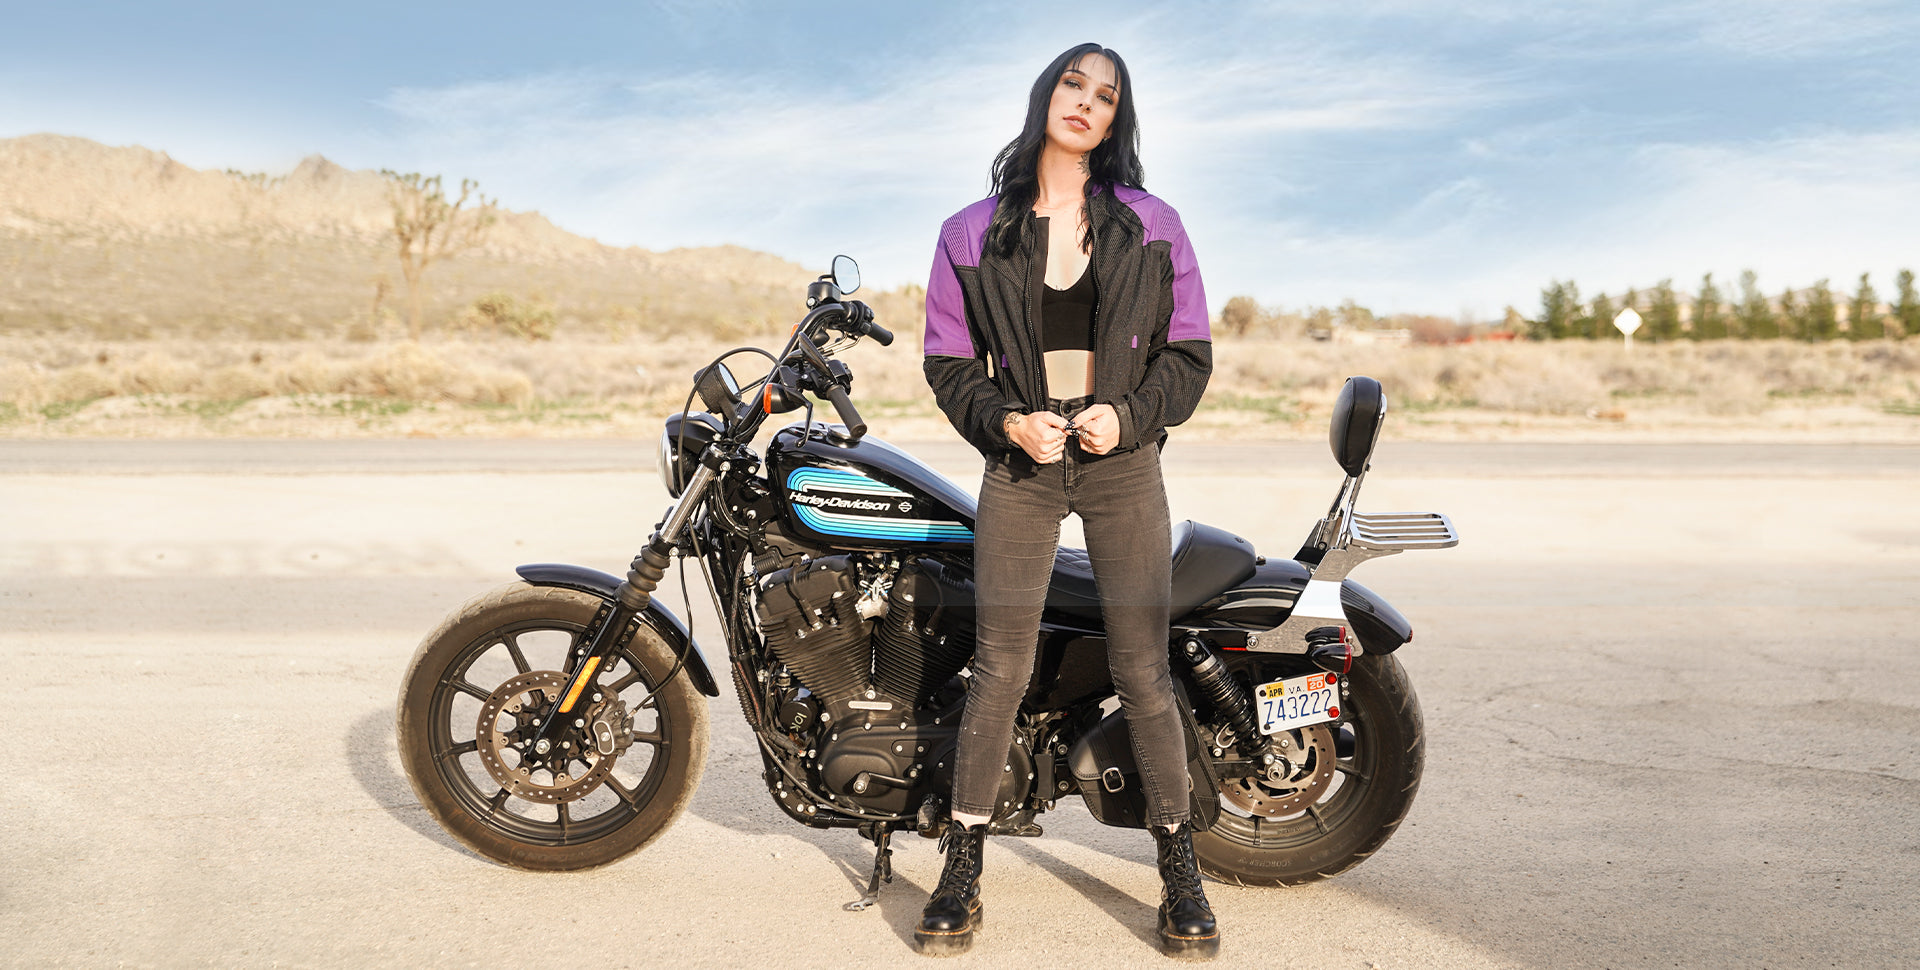 Protective Riding Apparel for Female Motorcyclists, Including Full-Figured  Women - Women Riders Now